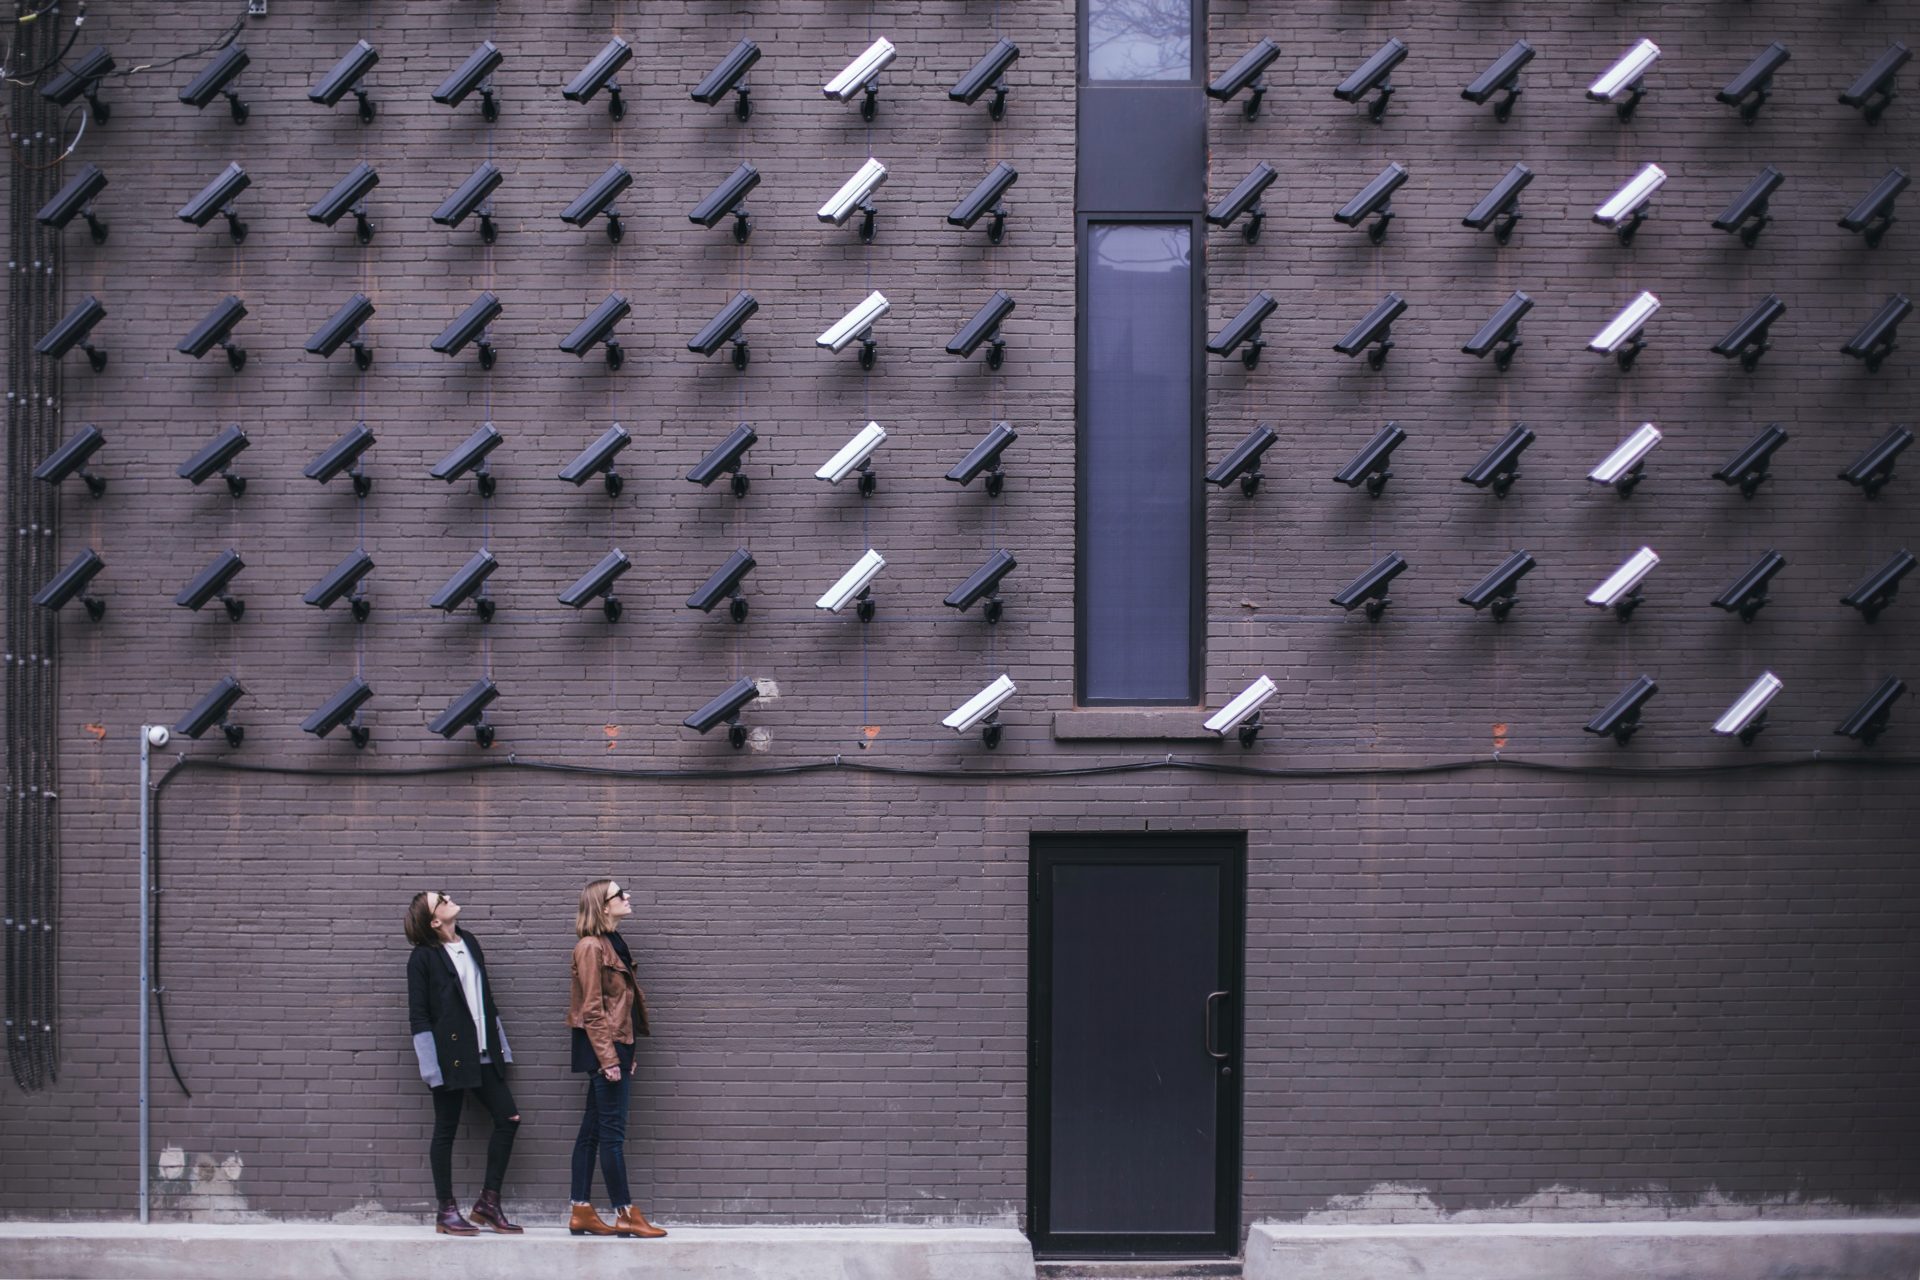 security cameras pointed at people, illustrating marketing data privacy